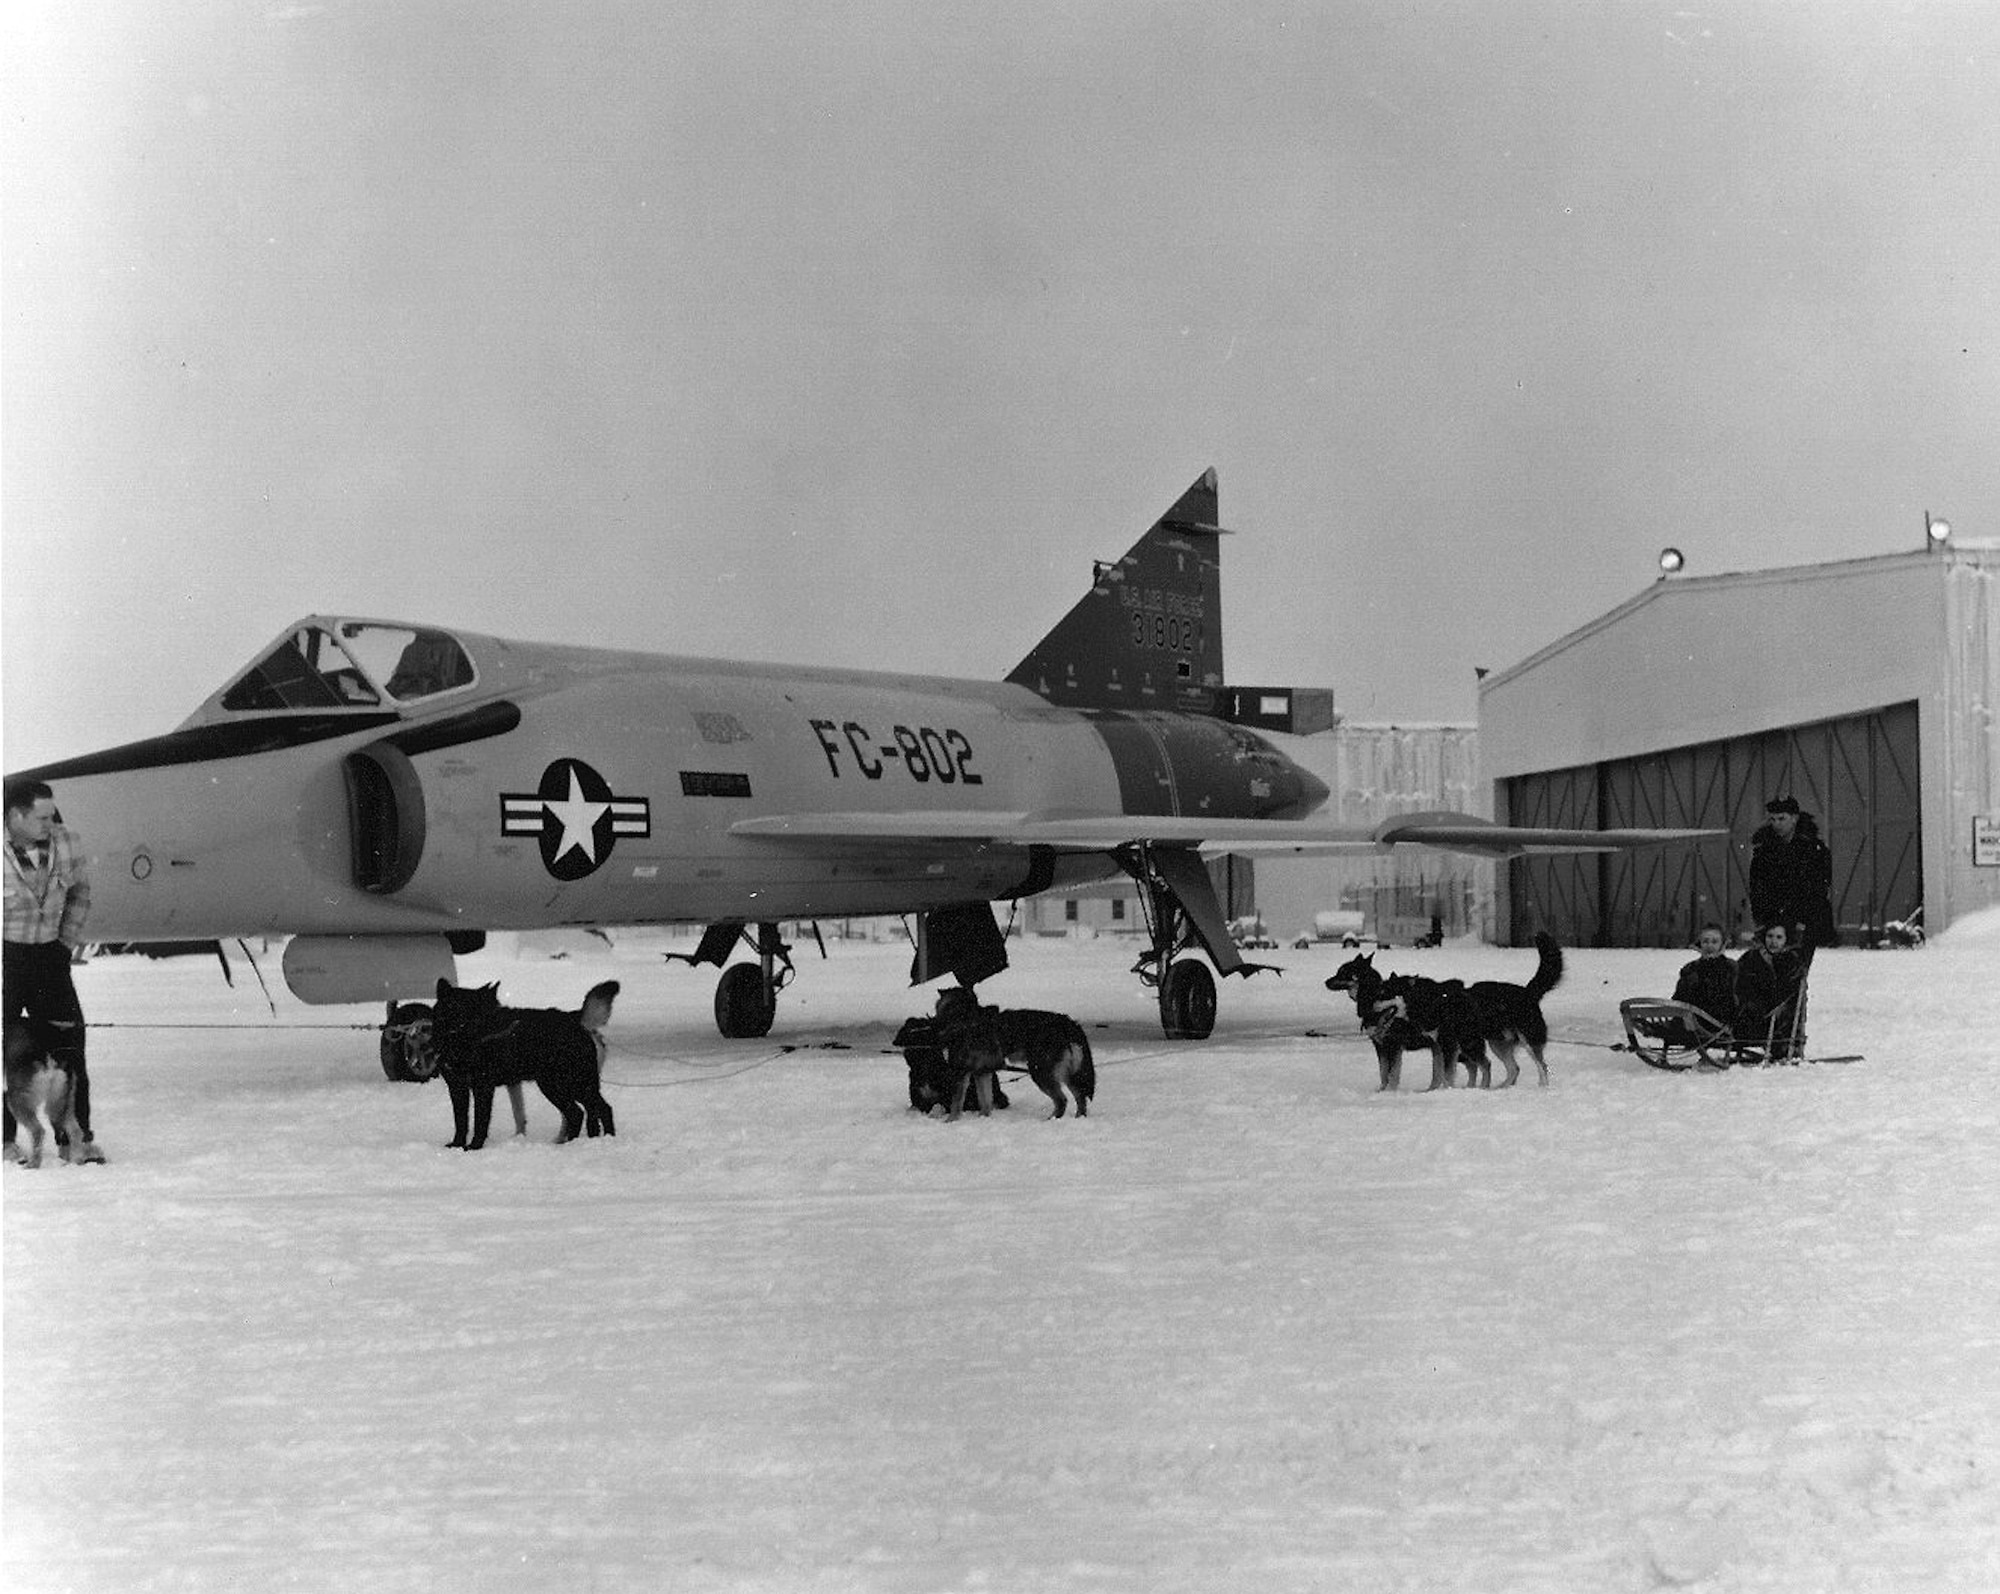 A team of sled dogs stand beside a Convair F-106 Delta Dart circa 1960 at Ladd Air Force Base, Alaska. (Photo courtesy of Fort Wainwright archives)